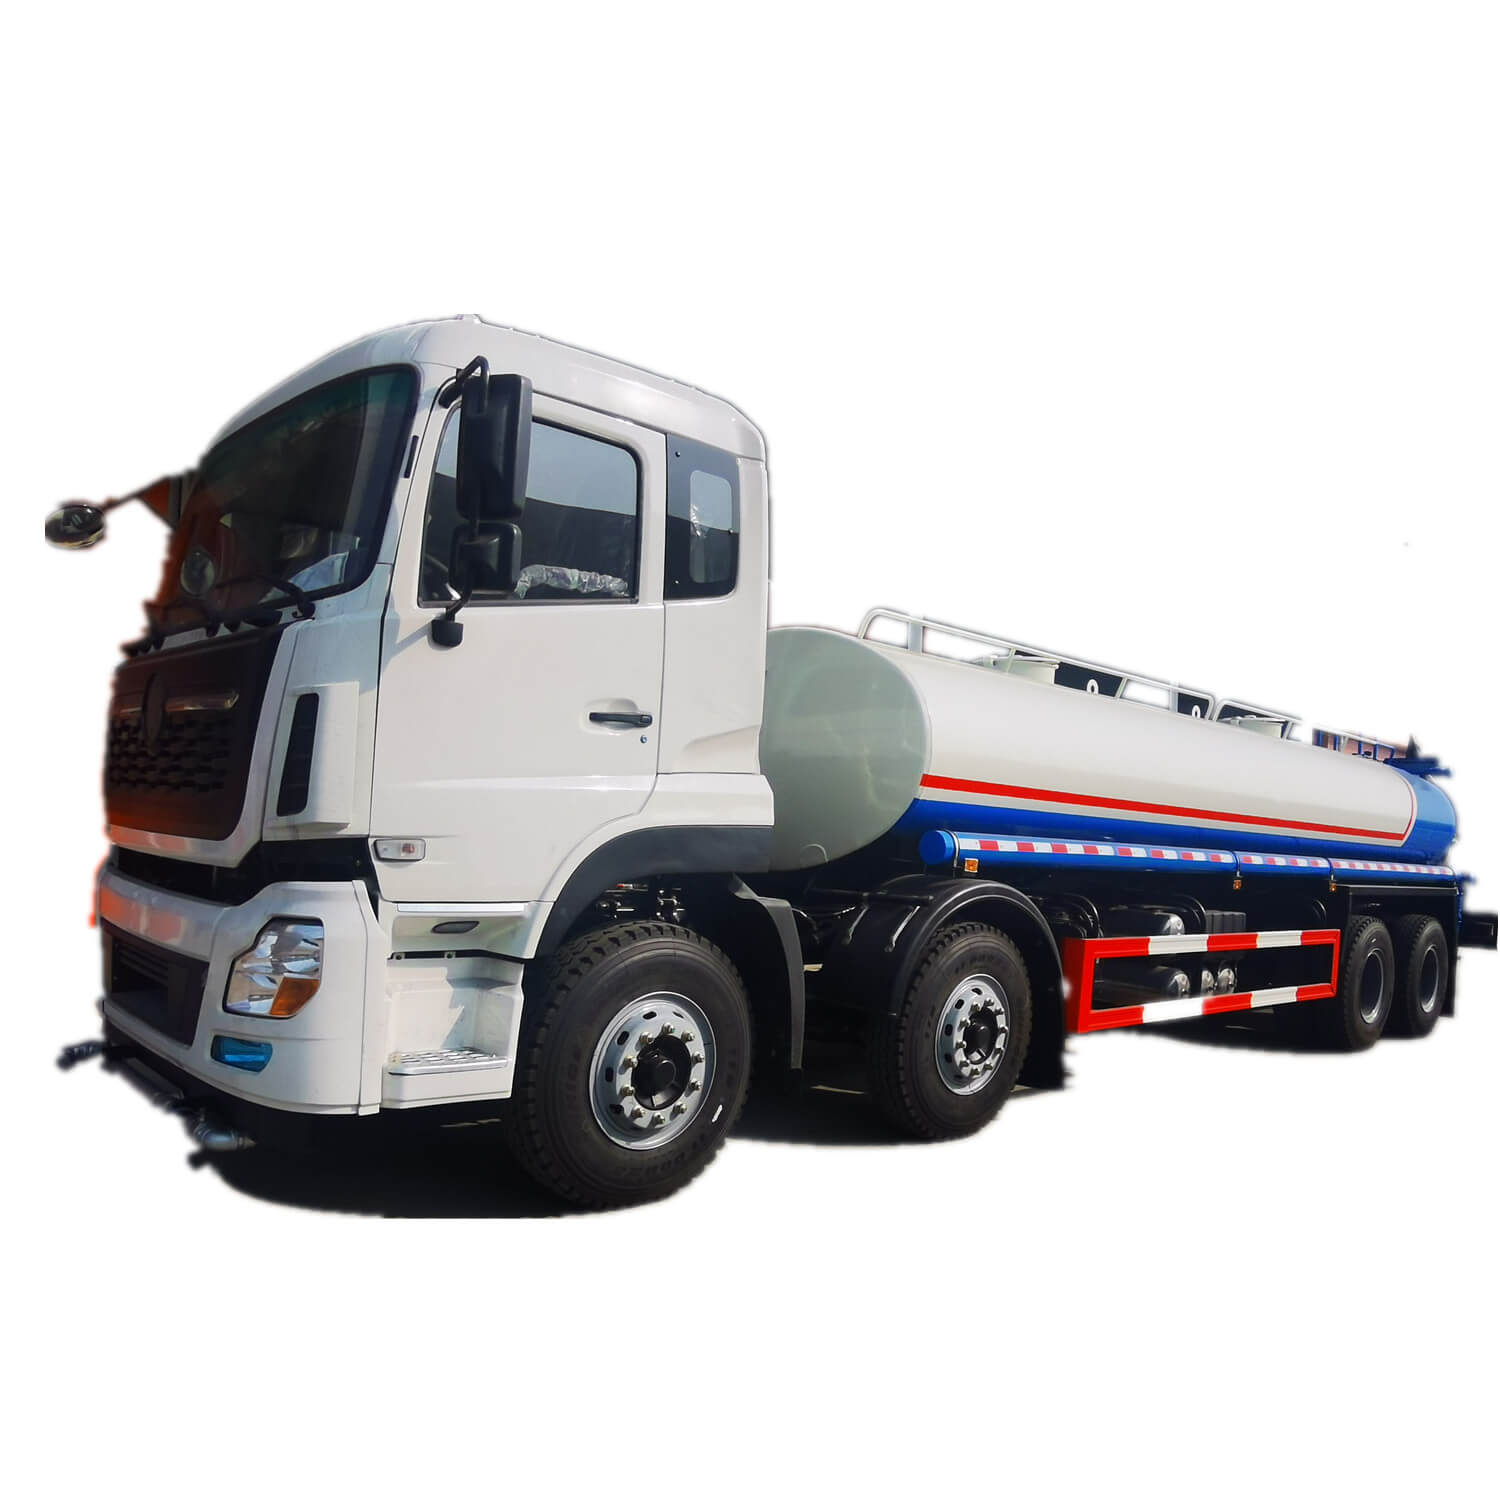 Dongfeng 5000 -6000 gallon Water Tank Truck with Front Spray Nozzles, Rear Water Sprinkler Cannon Two Sides Bowser for Dust Control